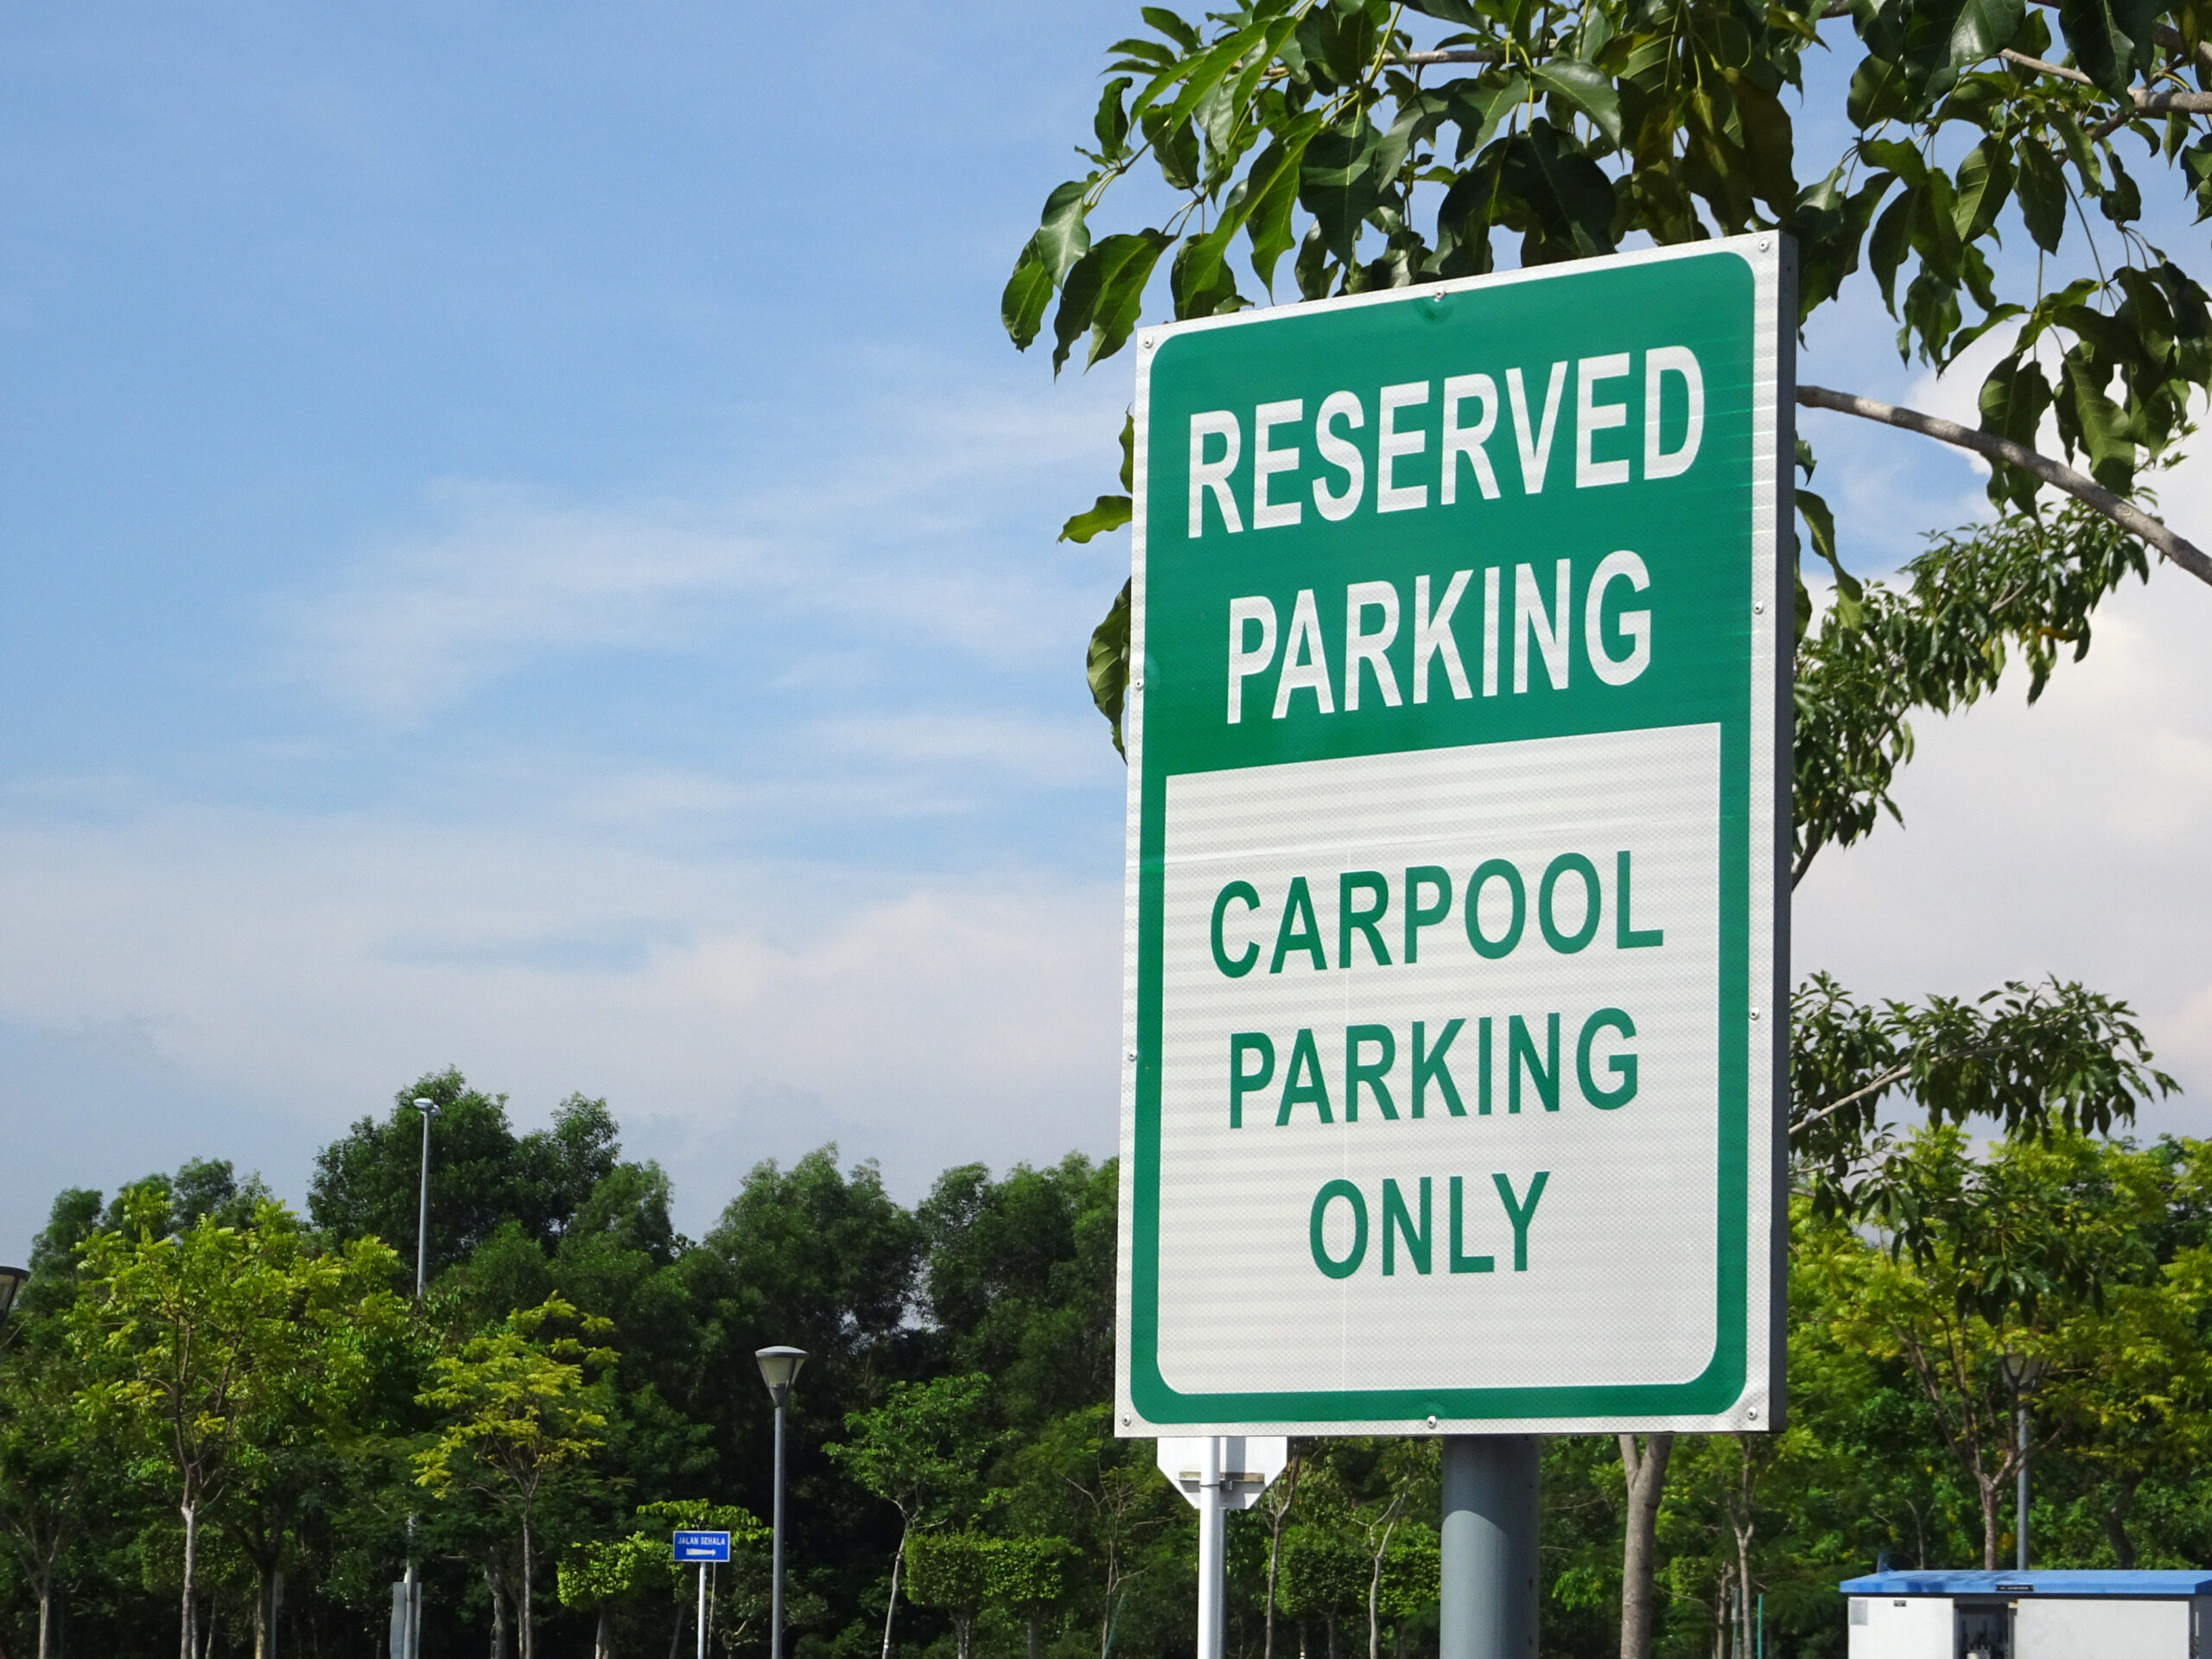 Reserved parking for people who do carpool only. Special car parks lot allocate for users who share car to go to their destination.